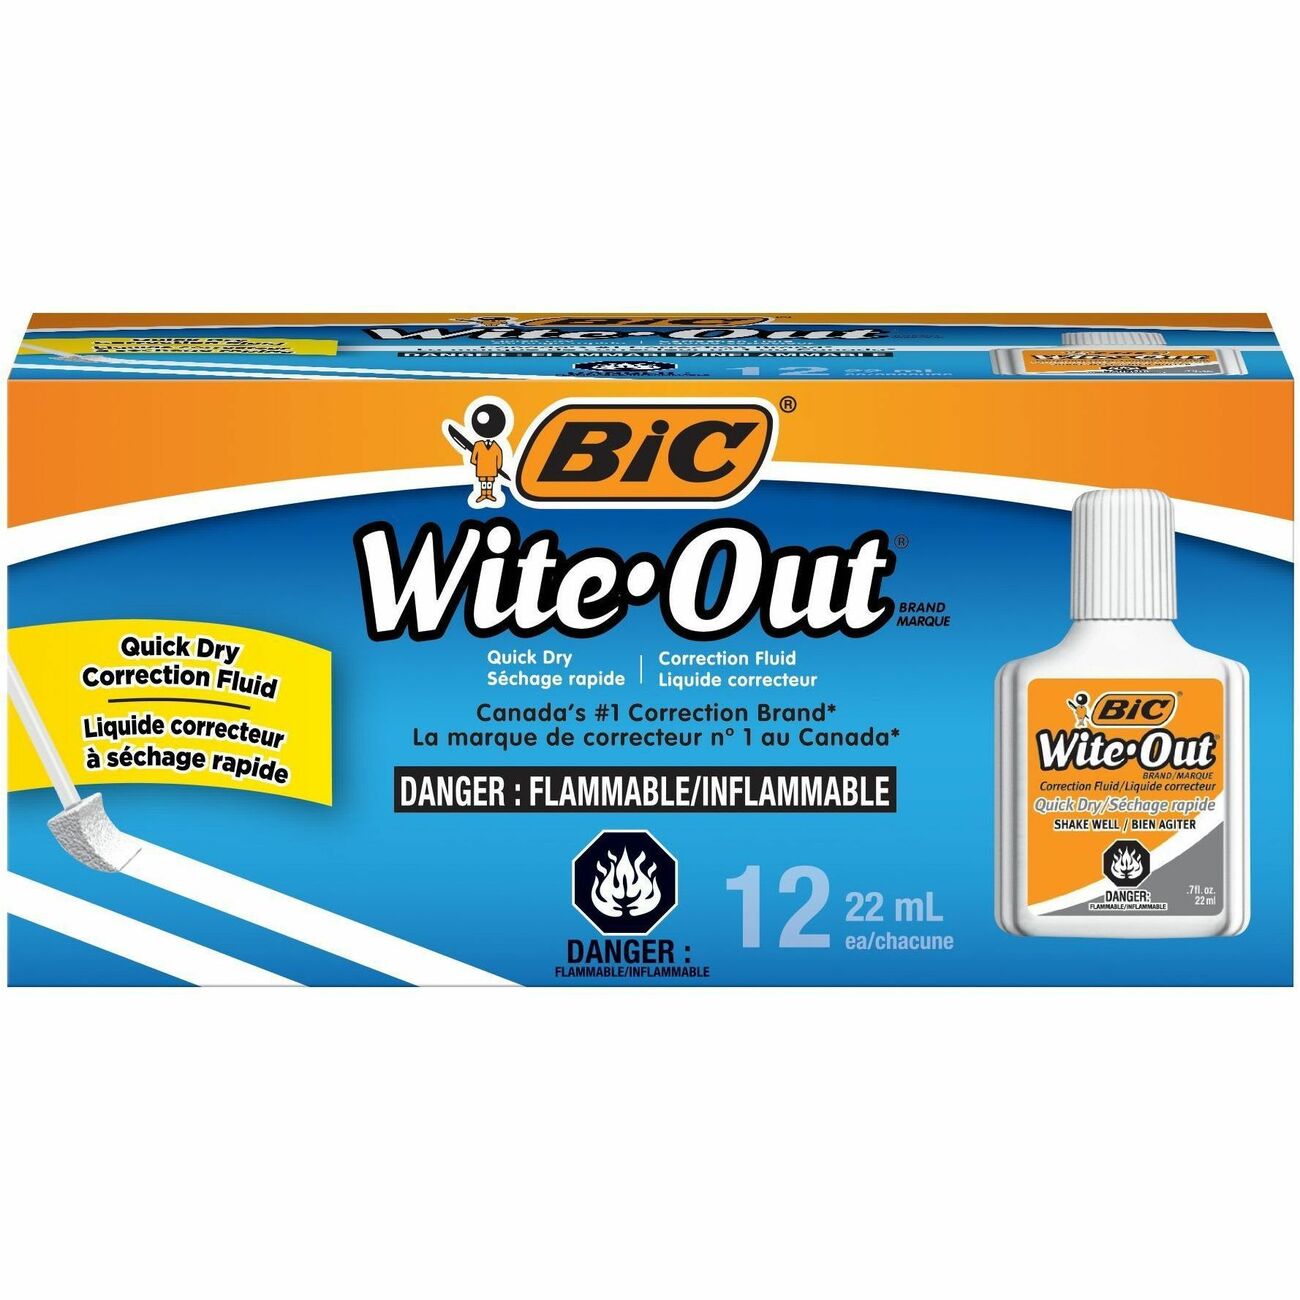 BIC Wite-Out Quick Dry Correction Fluid White